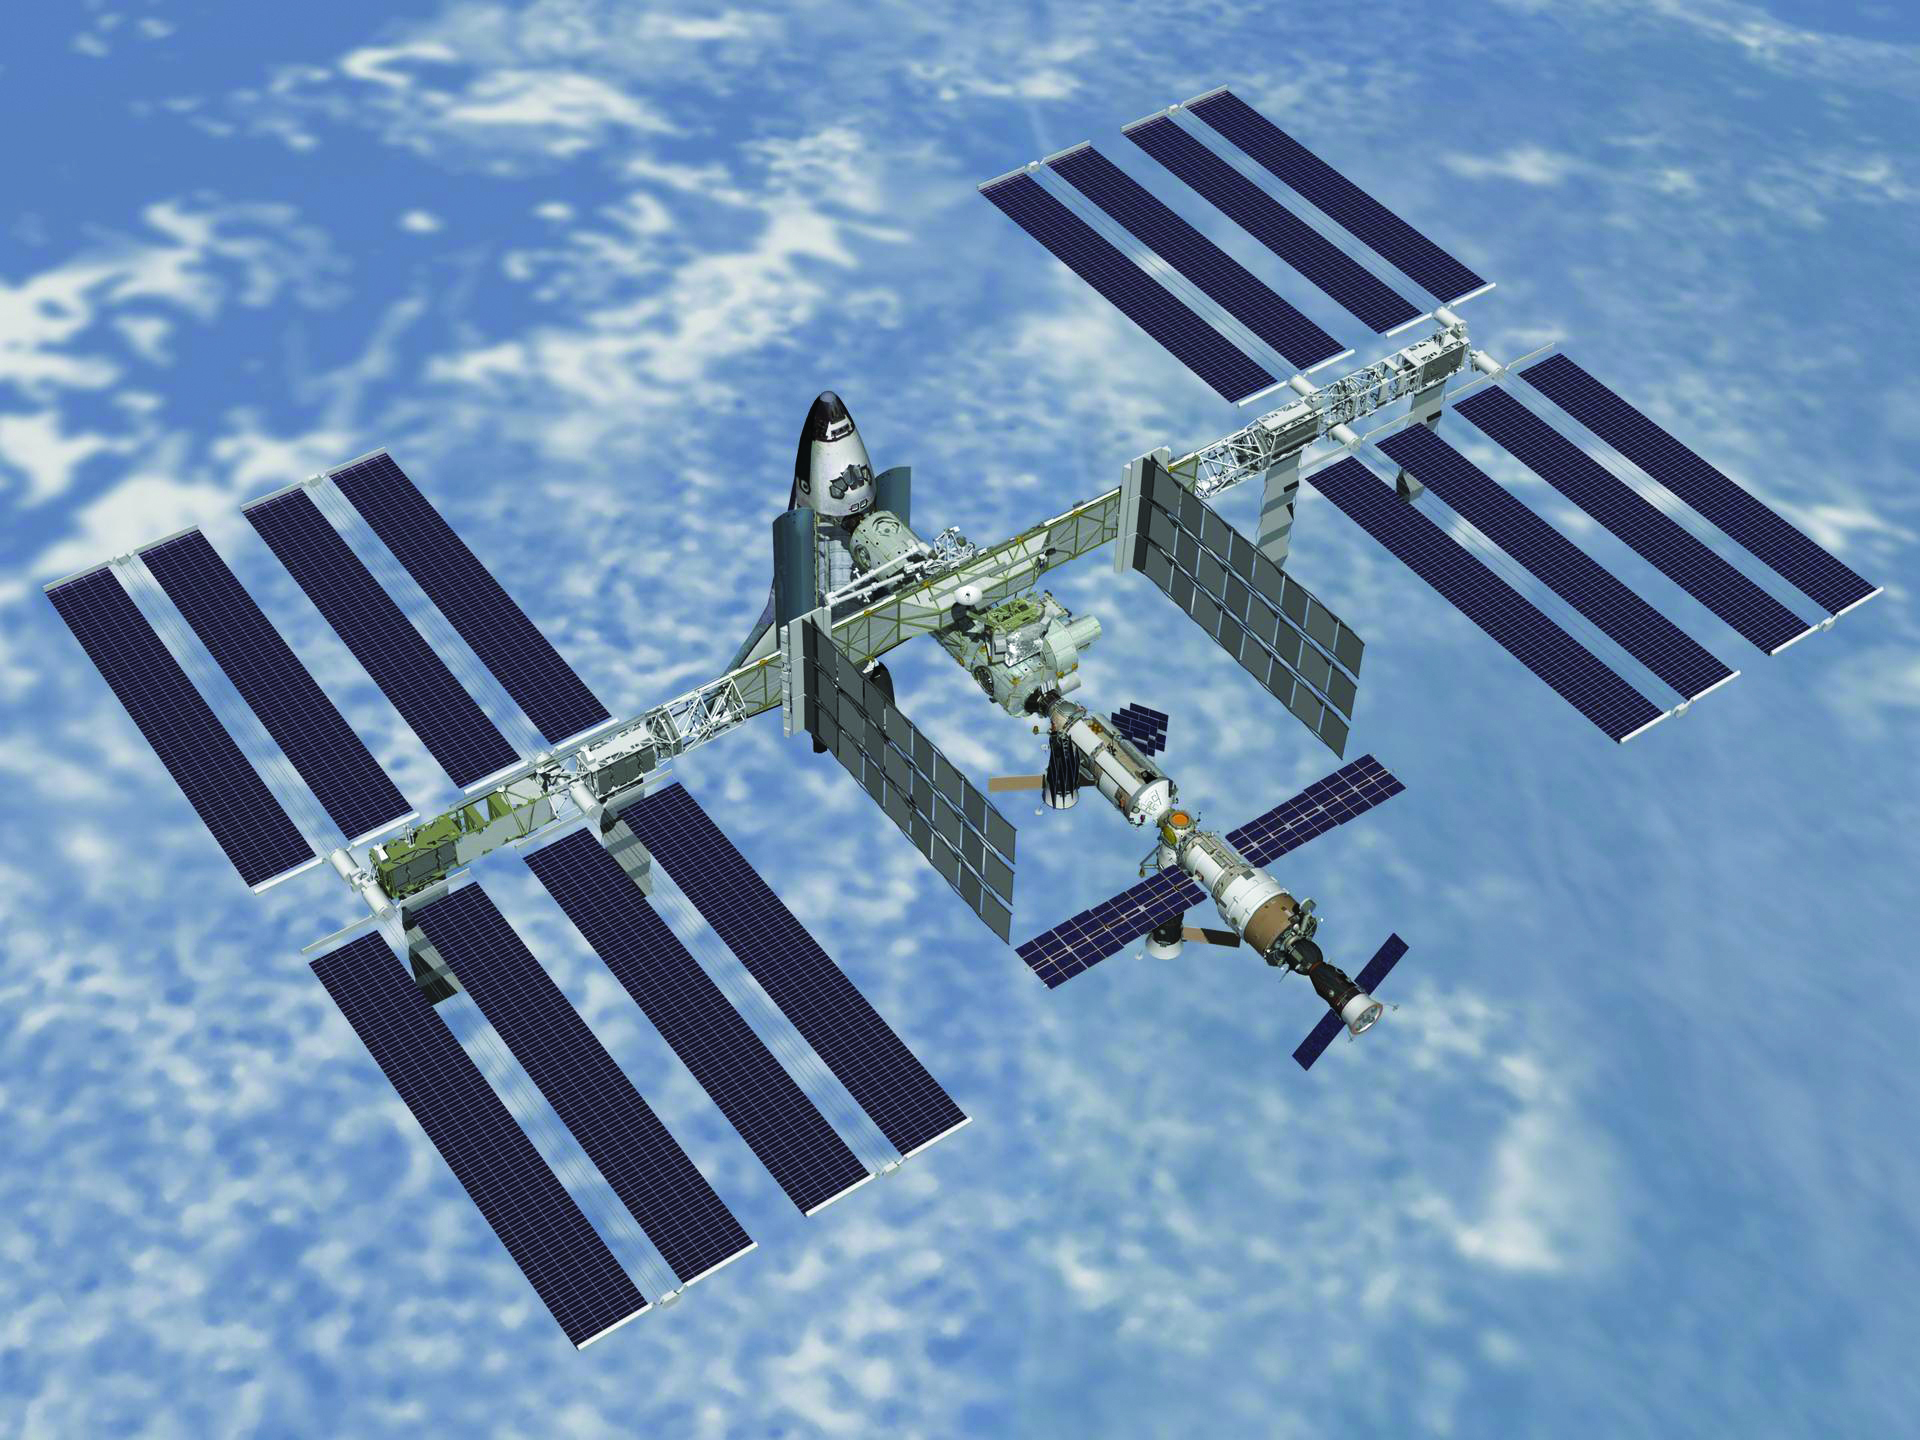 https://static.electronicsweekly.com/wp-content/uploads/2019/07/17101310/NASA-shuttle-docked-with-space-station.jpg